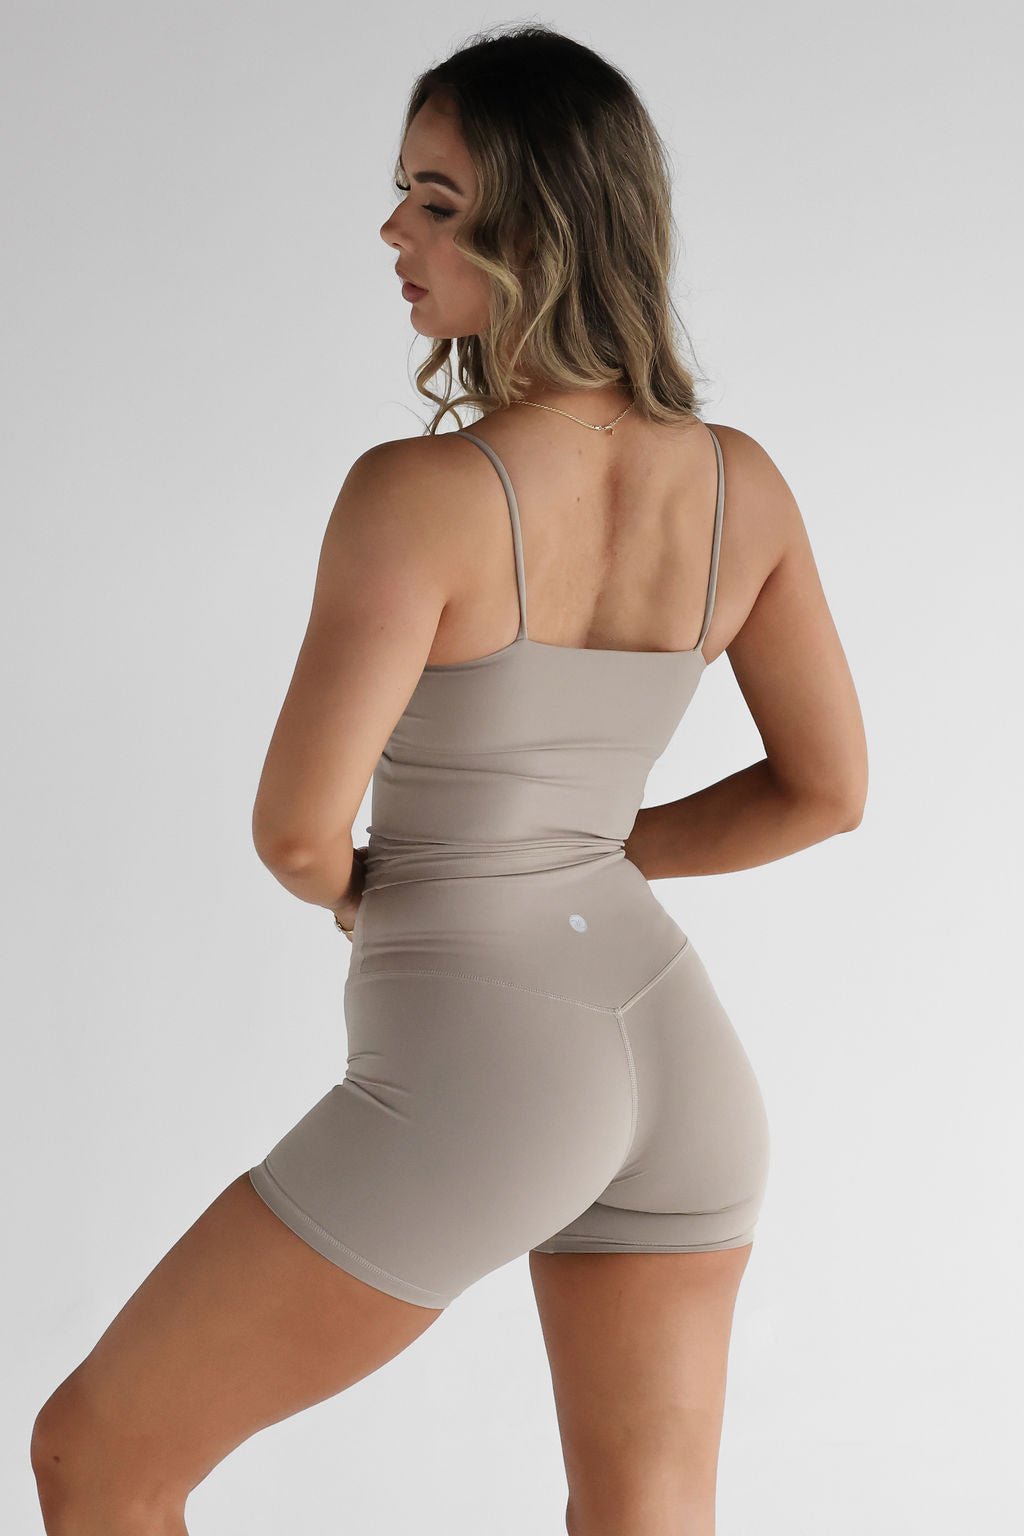 SCULPT Bike Shorts - Latte SHIPPING FROM 3/11 - LEELO ACTIVE